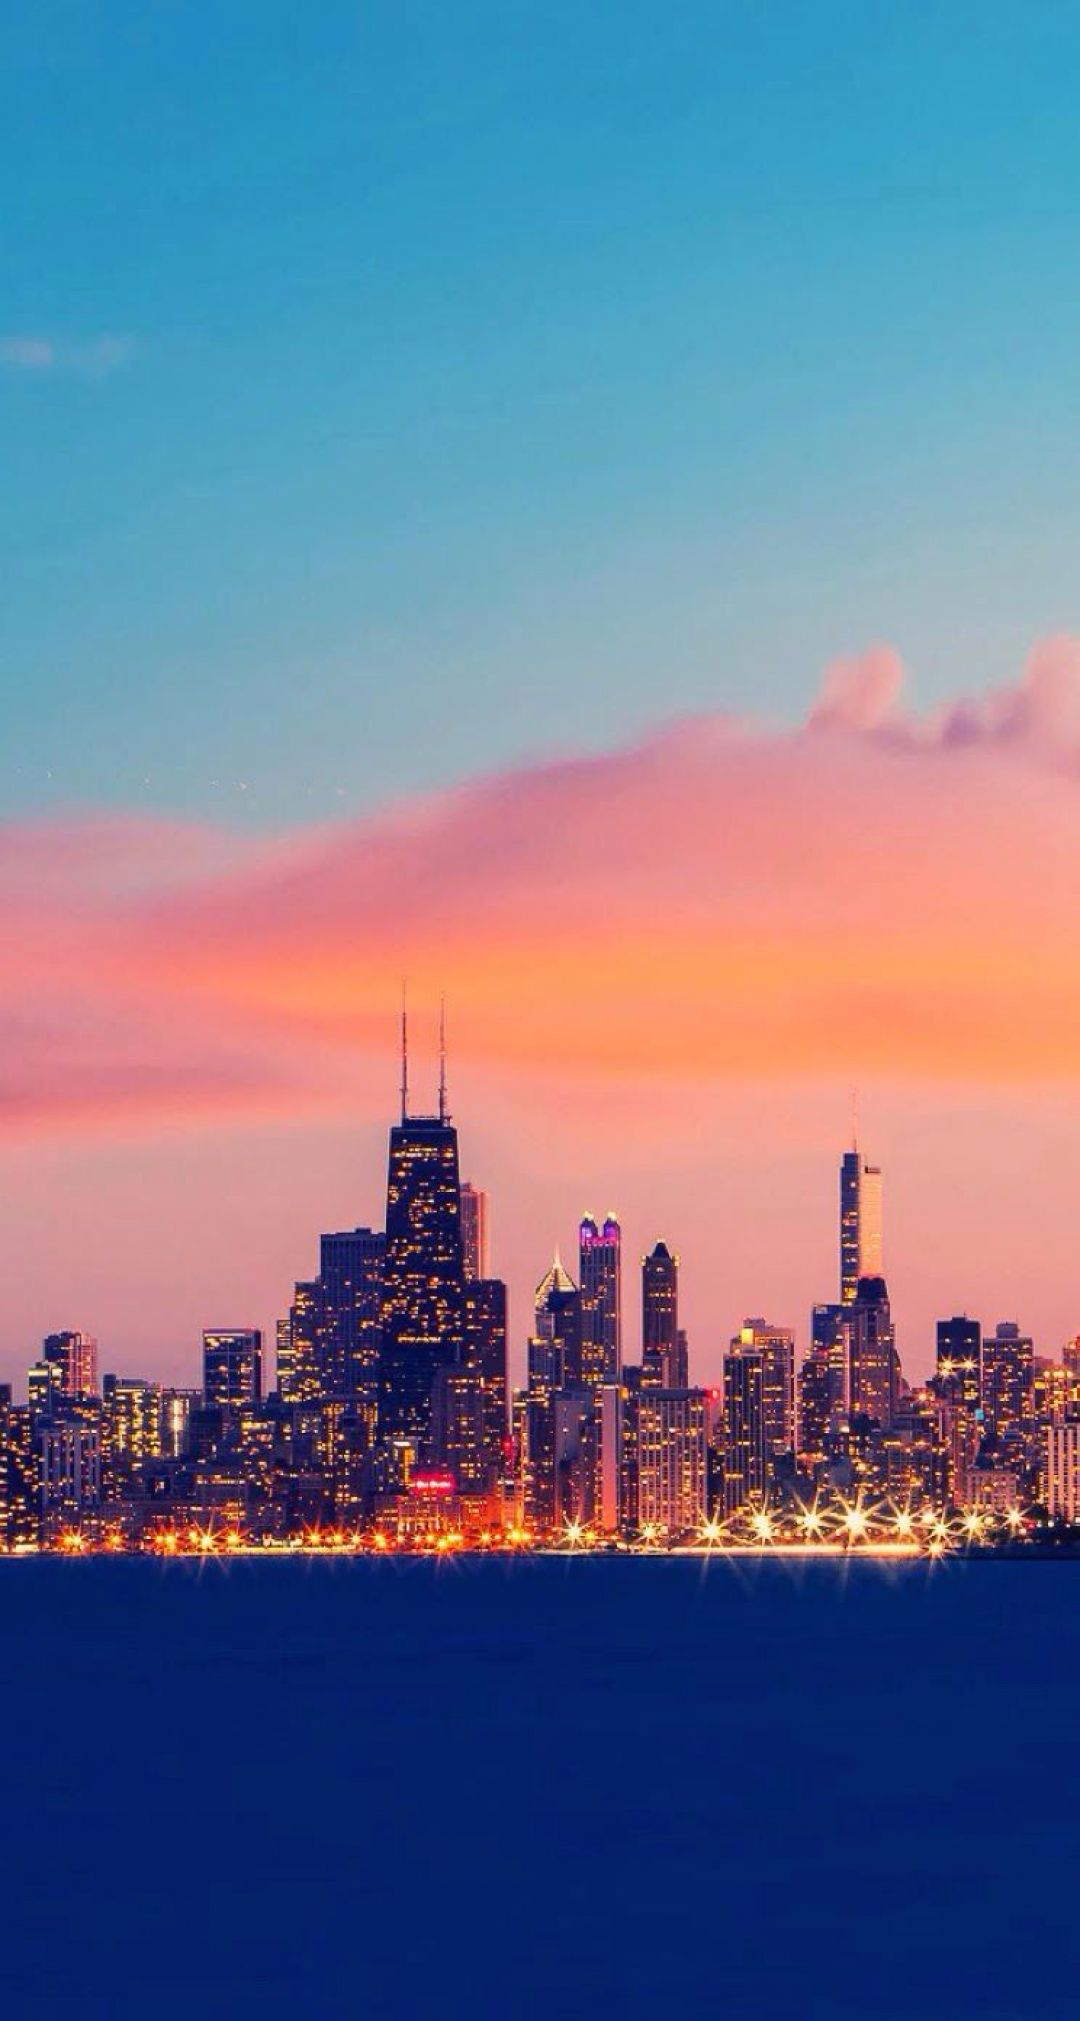 Android, Iphone, Desktop Hd Backgrounds / Wallpapers - Chicago Skyline Wallpaper Iphone , HD Wallpaper & Backgrounds